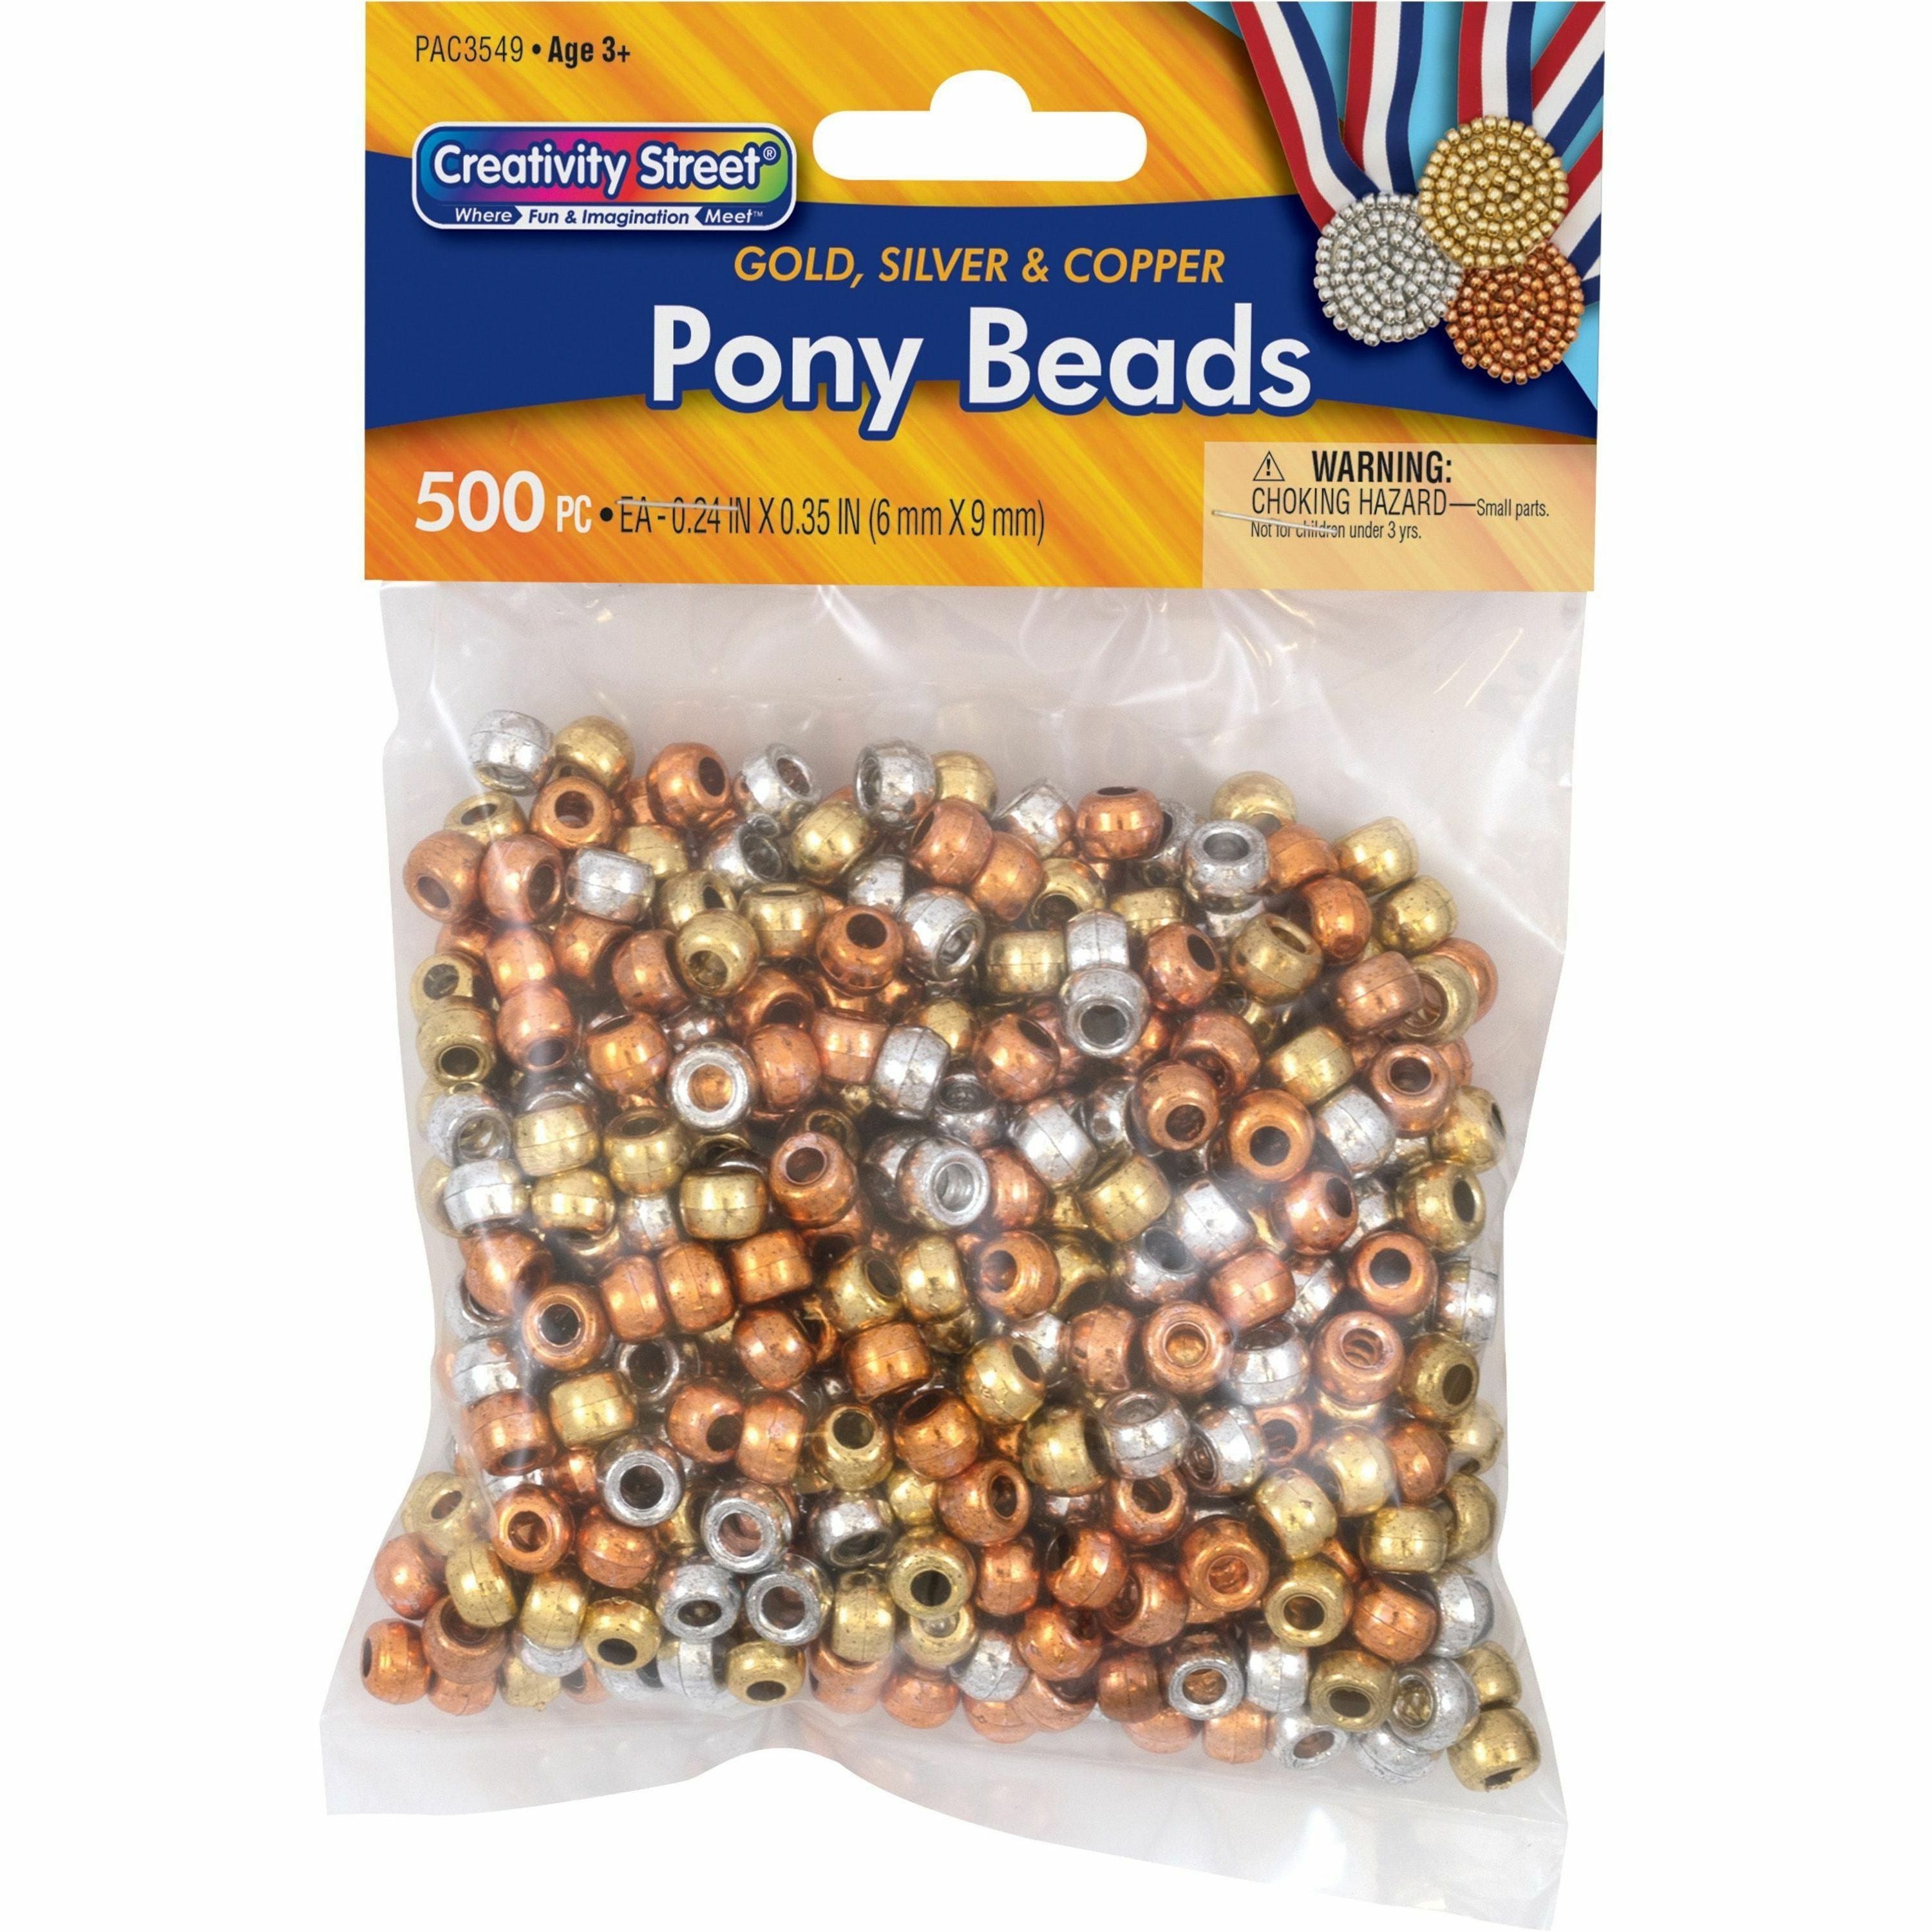 pacon-pony-beads-skill-learning-arts-&-crafts-creativity-assorted_pac3549 - 1